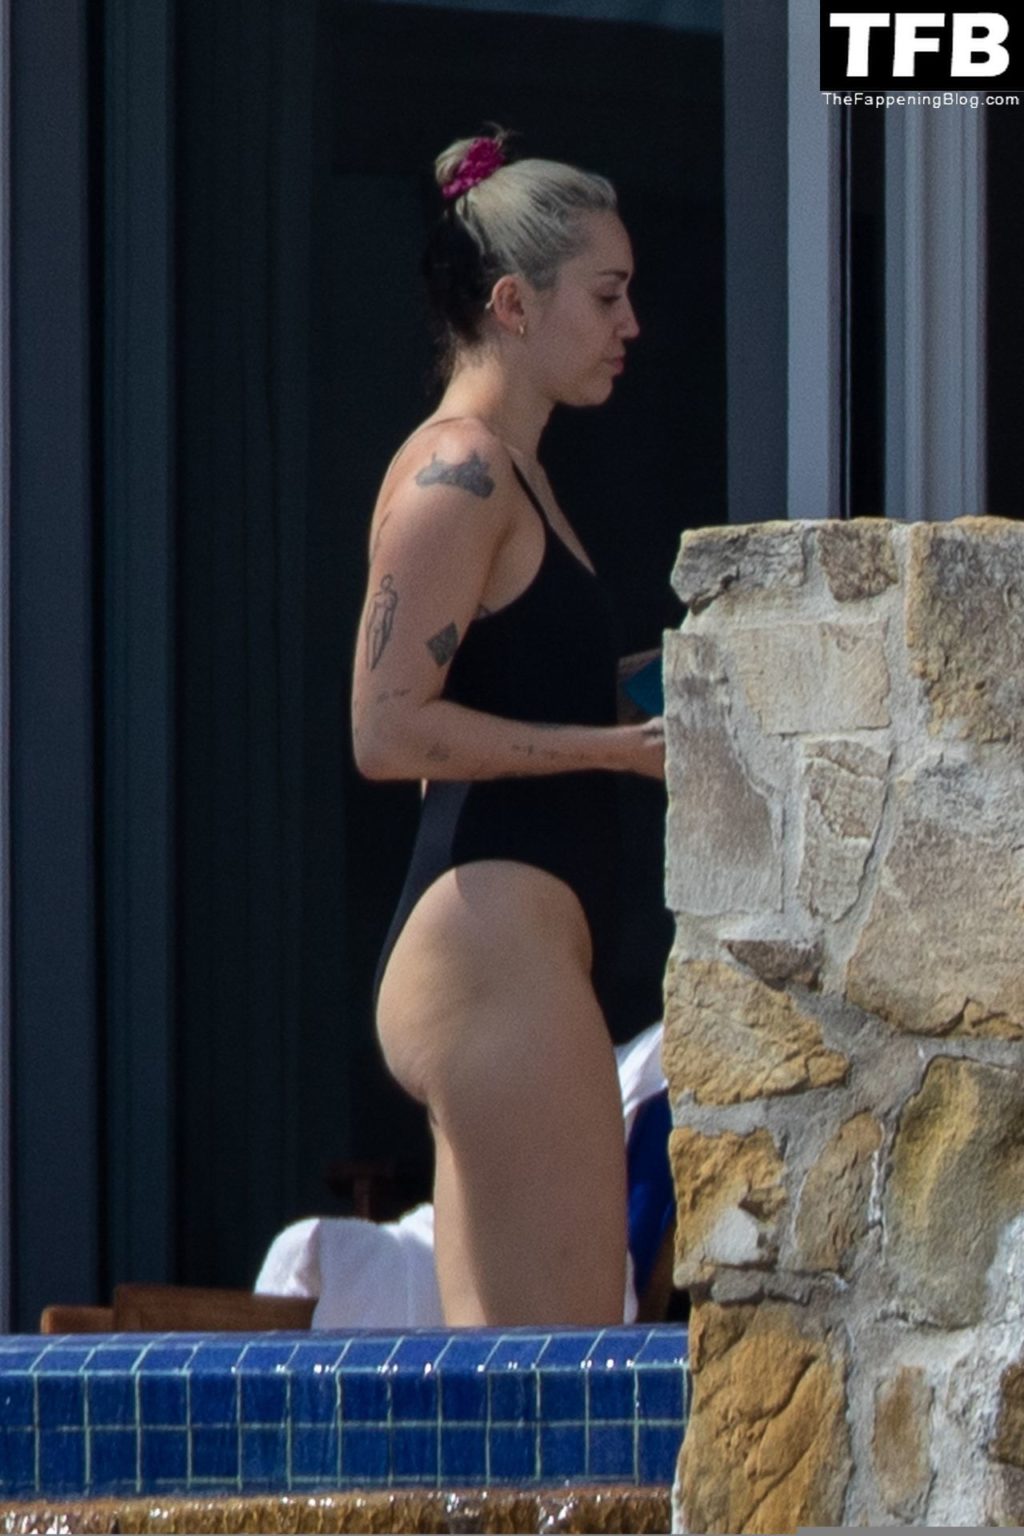 Miley Cyrus Sexy The Fappening Blog 22 1024x1536 - Miley Cyrus Brings Beach Body to Cabo San Lucas Alongside Her New Rumored Boyfriend (36 Photos)